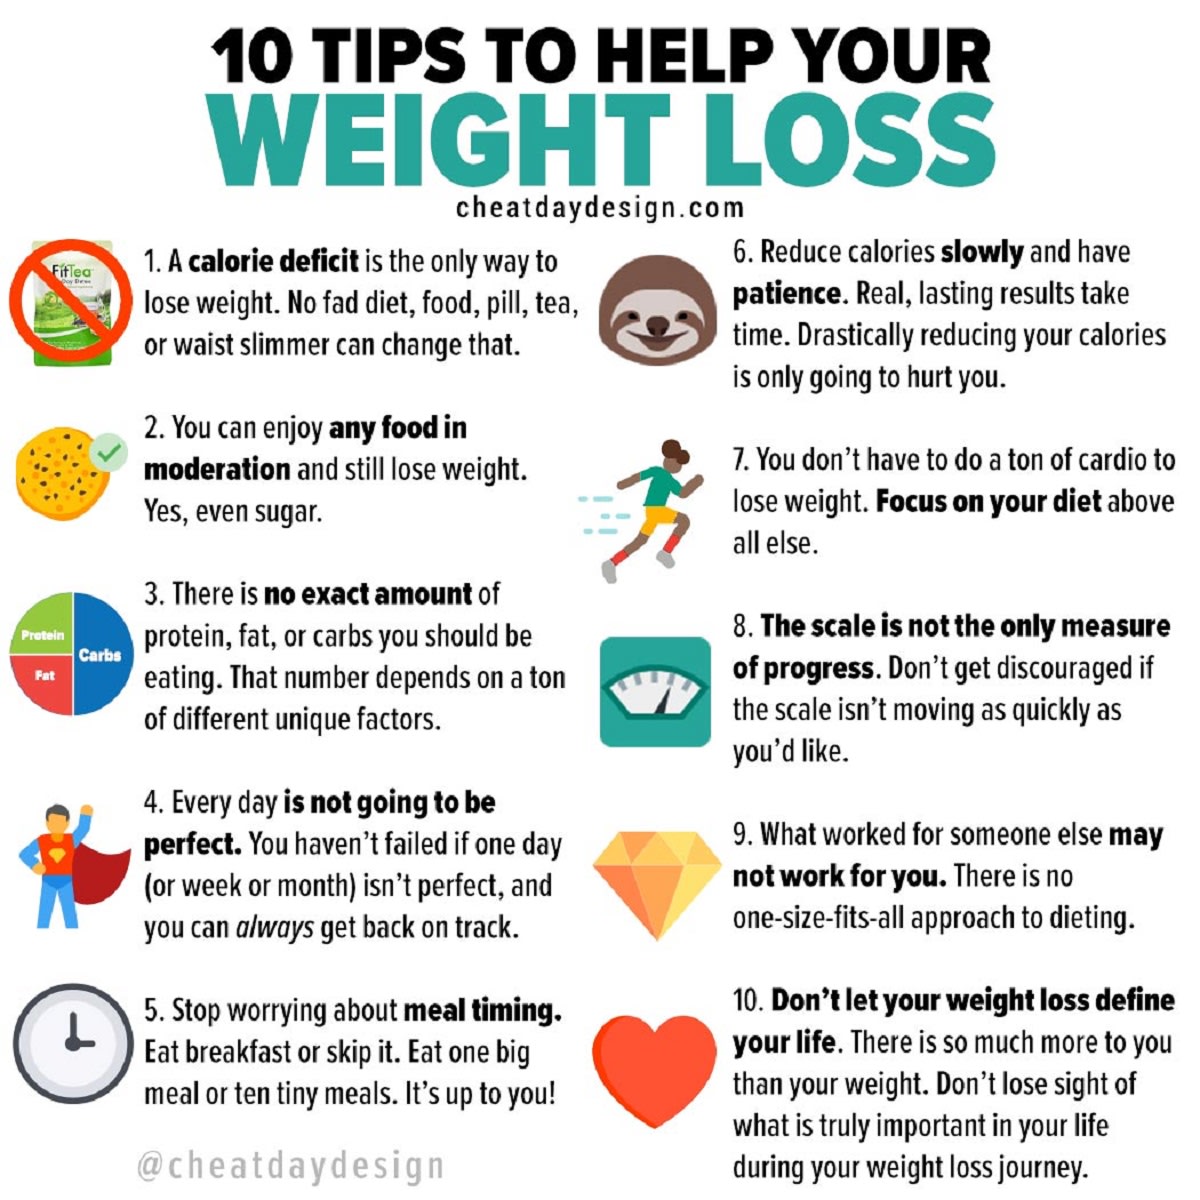 Weight Loss Isn't Just a Number